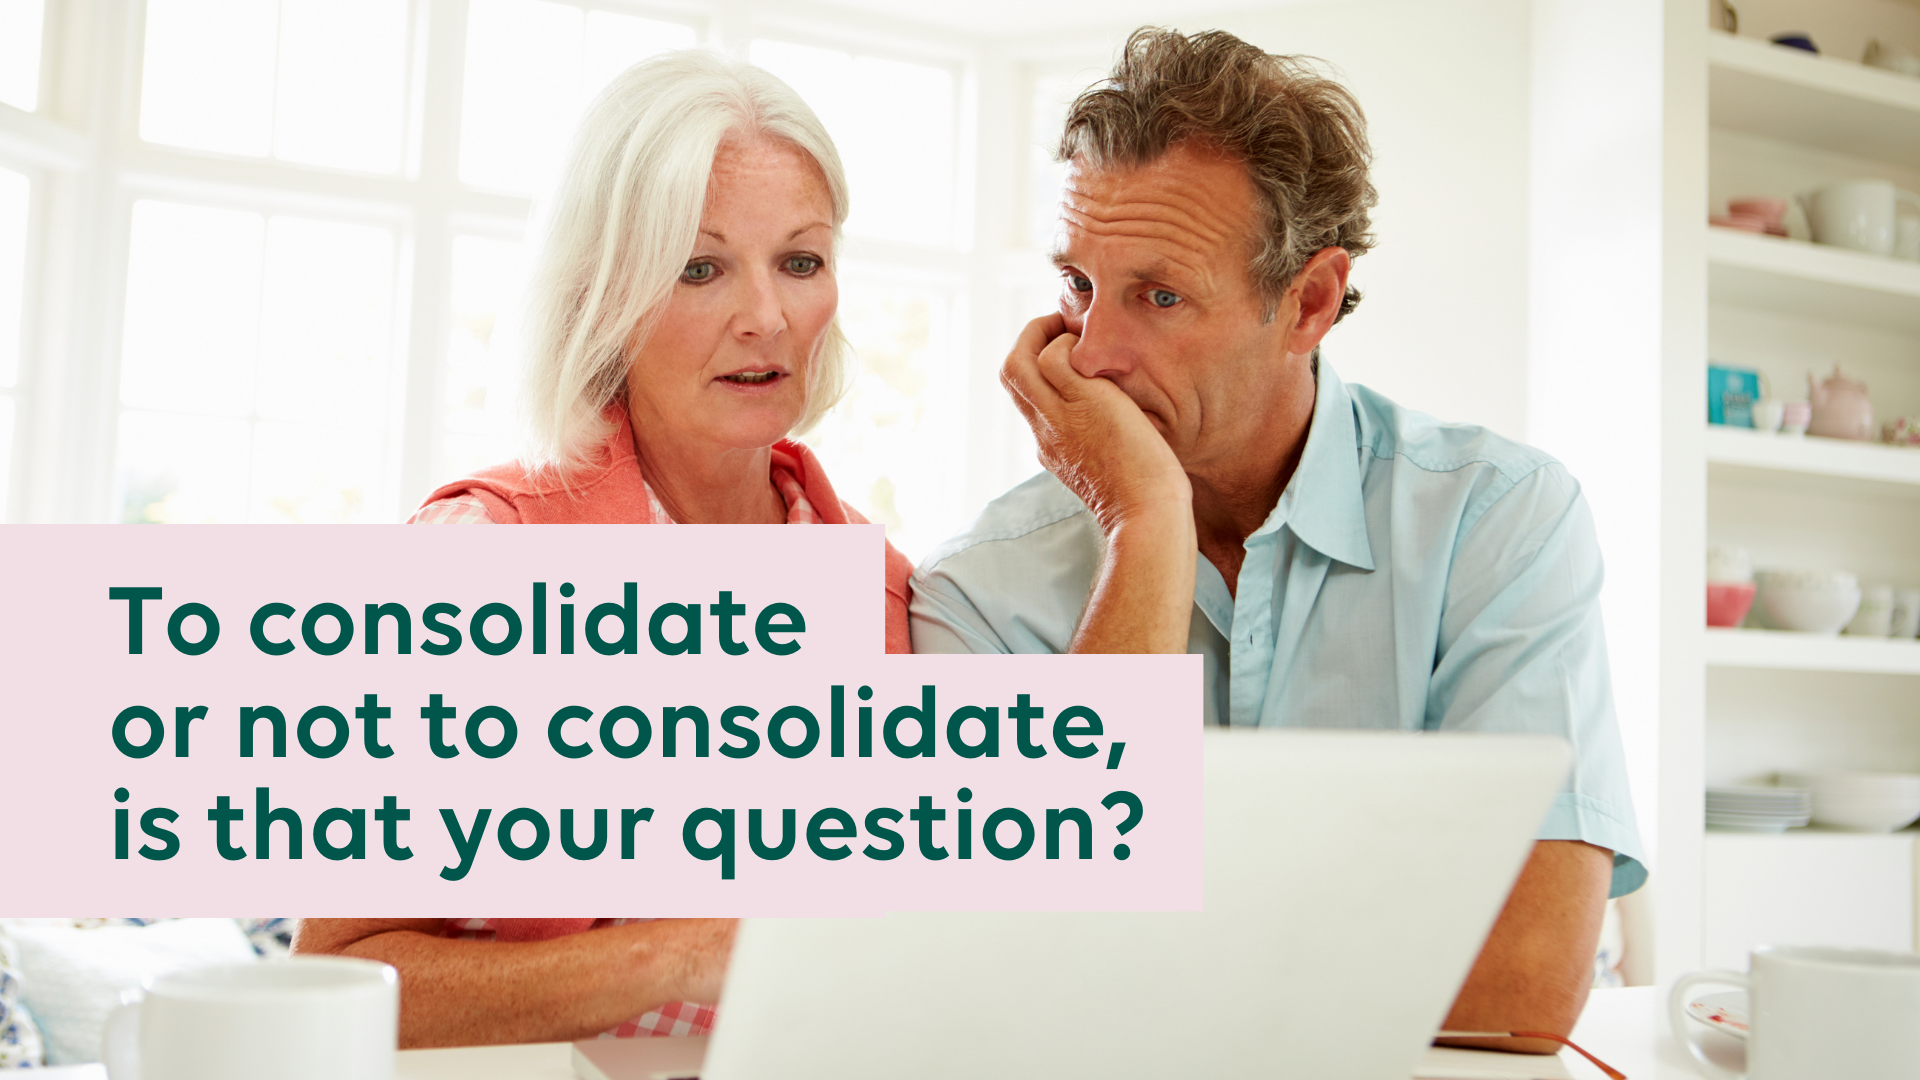 To consolidate or not to consolidate, is that your question?